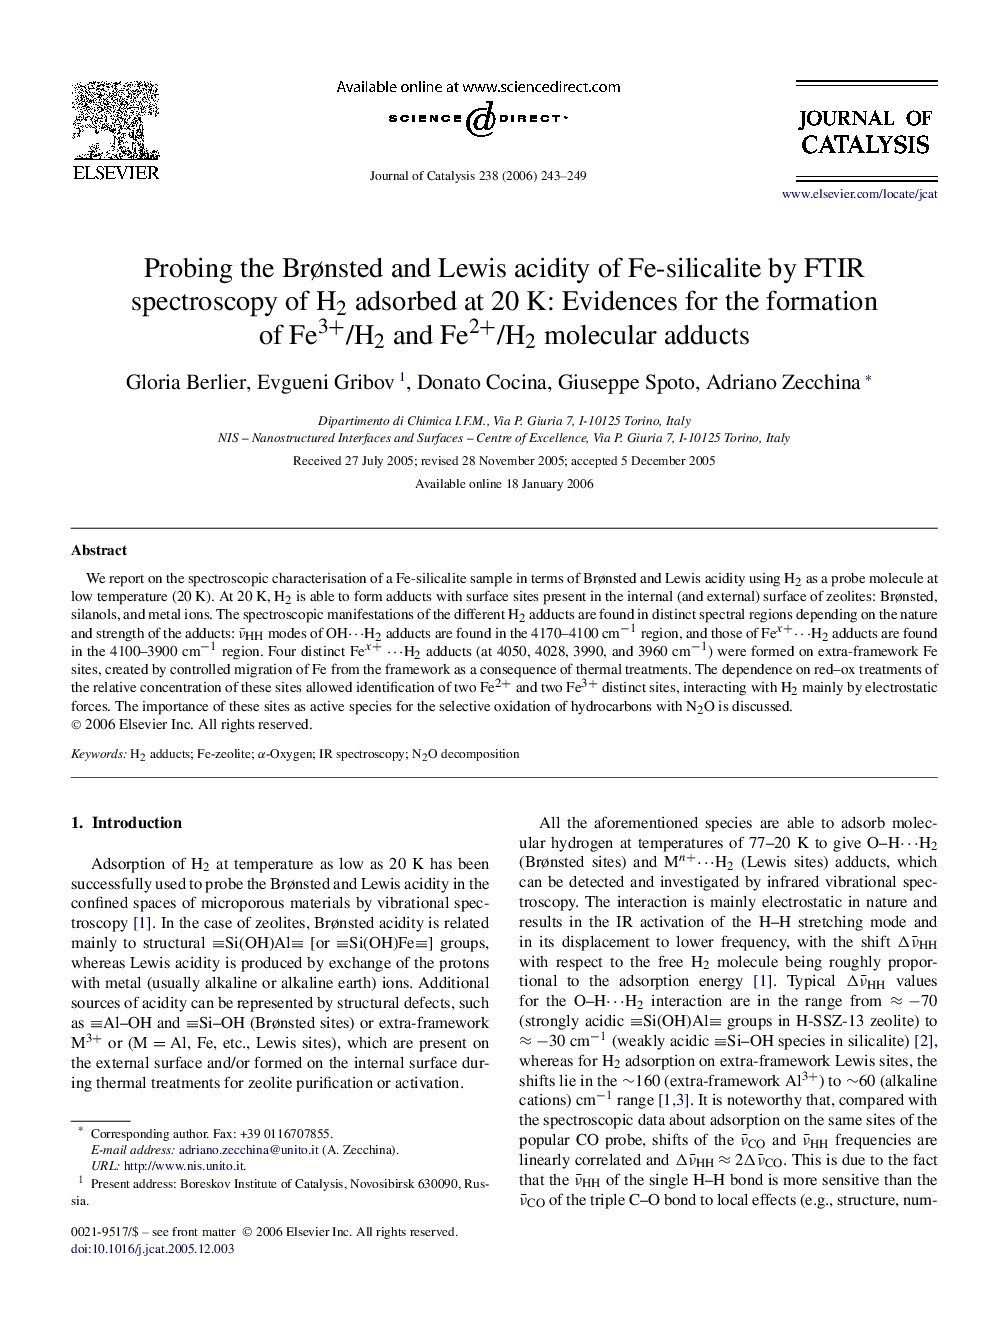 Probing the Brønsted and Lewis acidity of Fe-silicalite by FTIR spectroscopy of H2 adsorbed at 20 K: Evidences for the formation of Fe3+/H2 and Fe2+/H2 molecular adducts